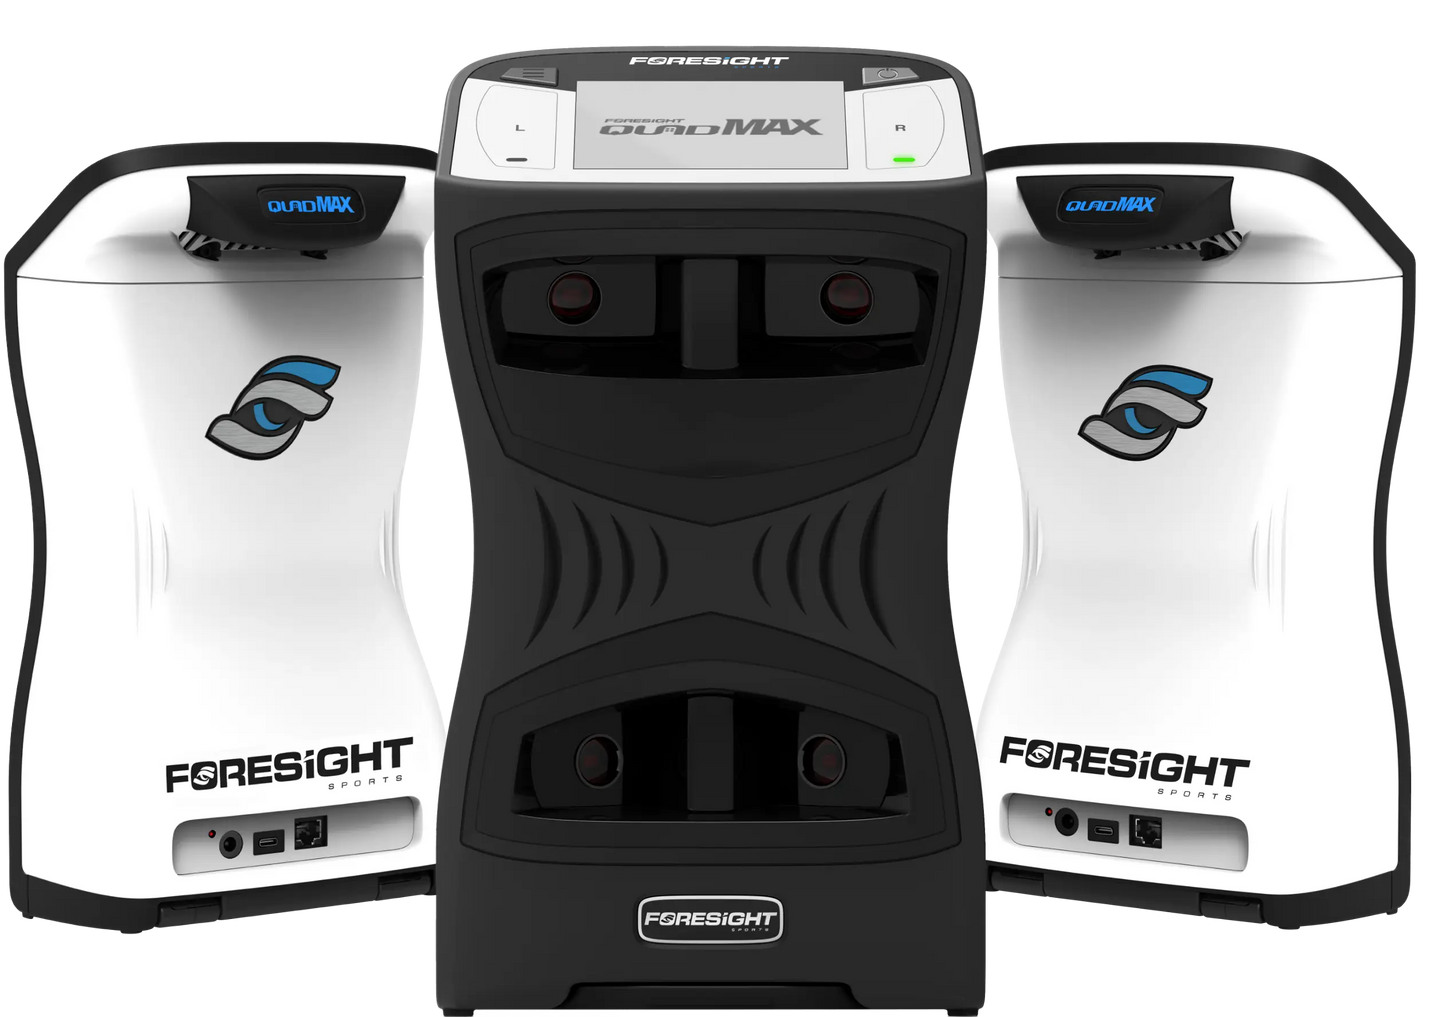 Foresight QuadMax front and rear views